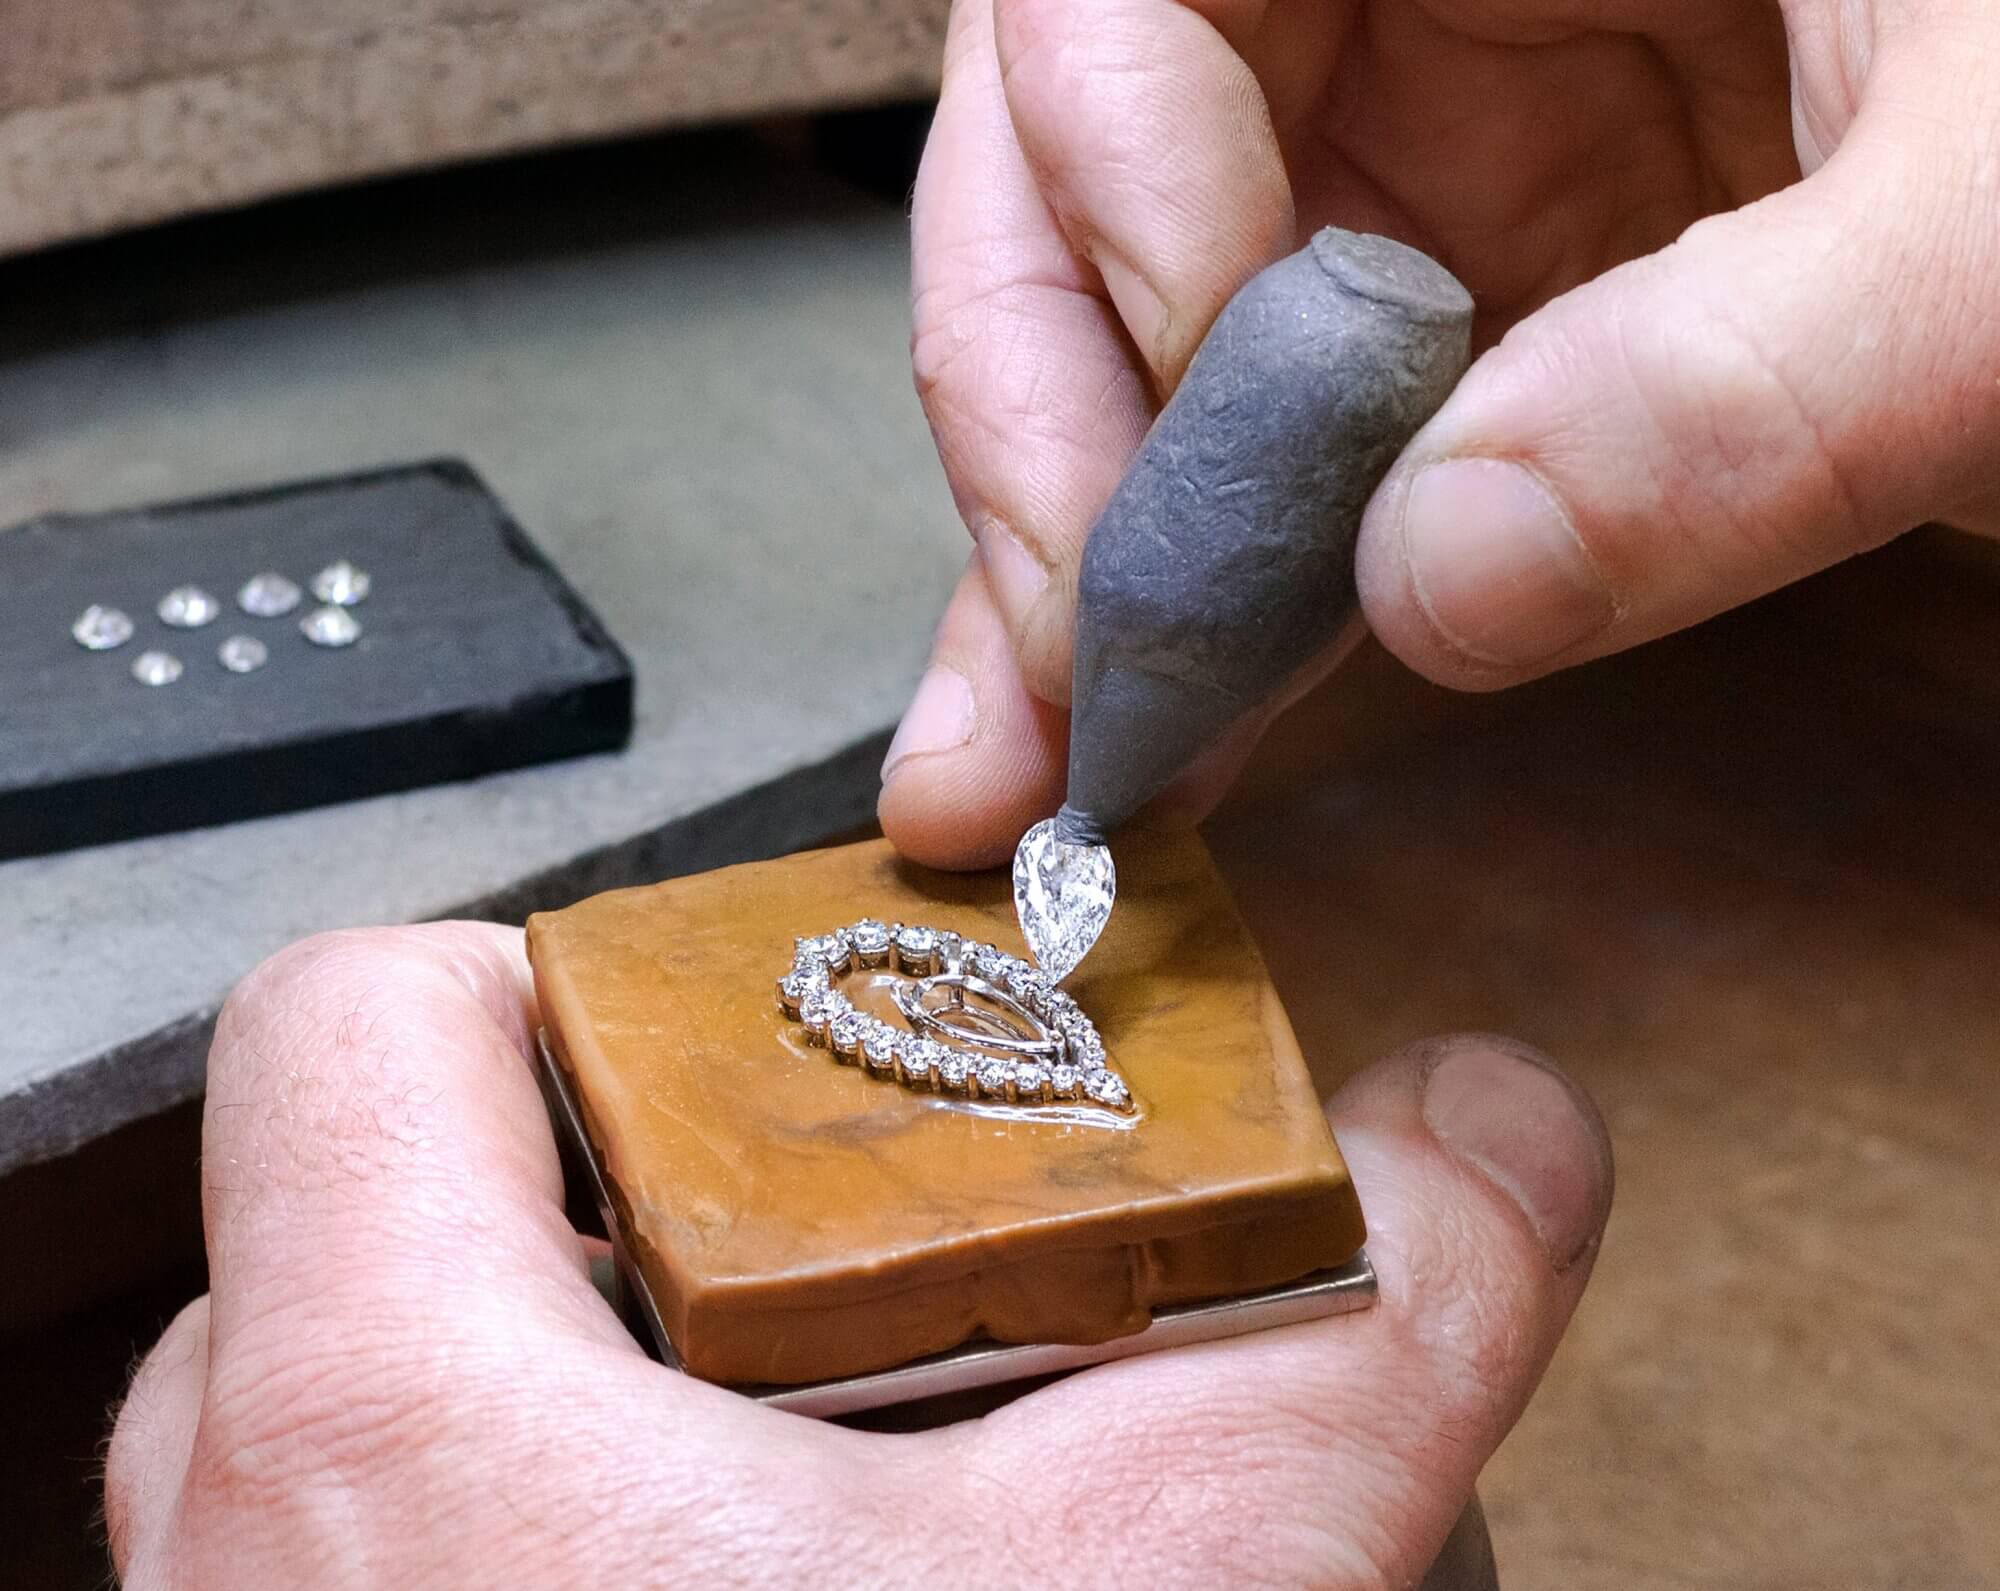 The craftsman jeweller creates the mount in white gold